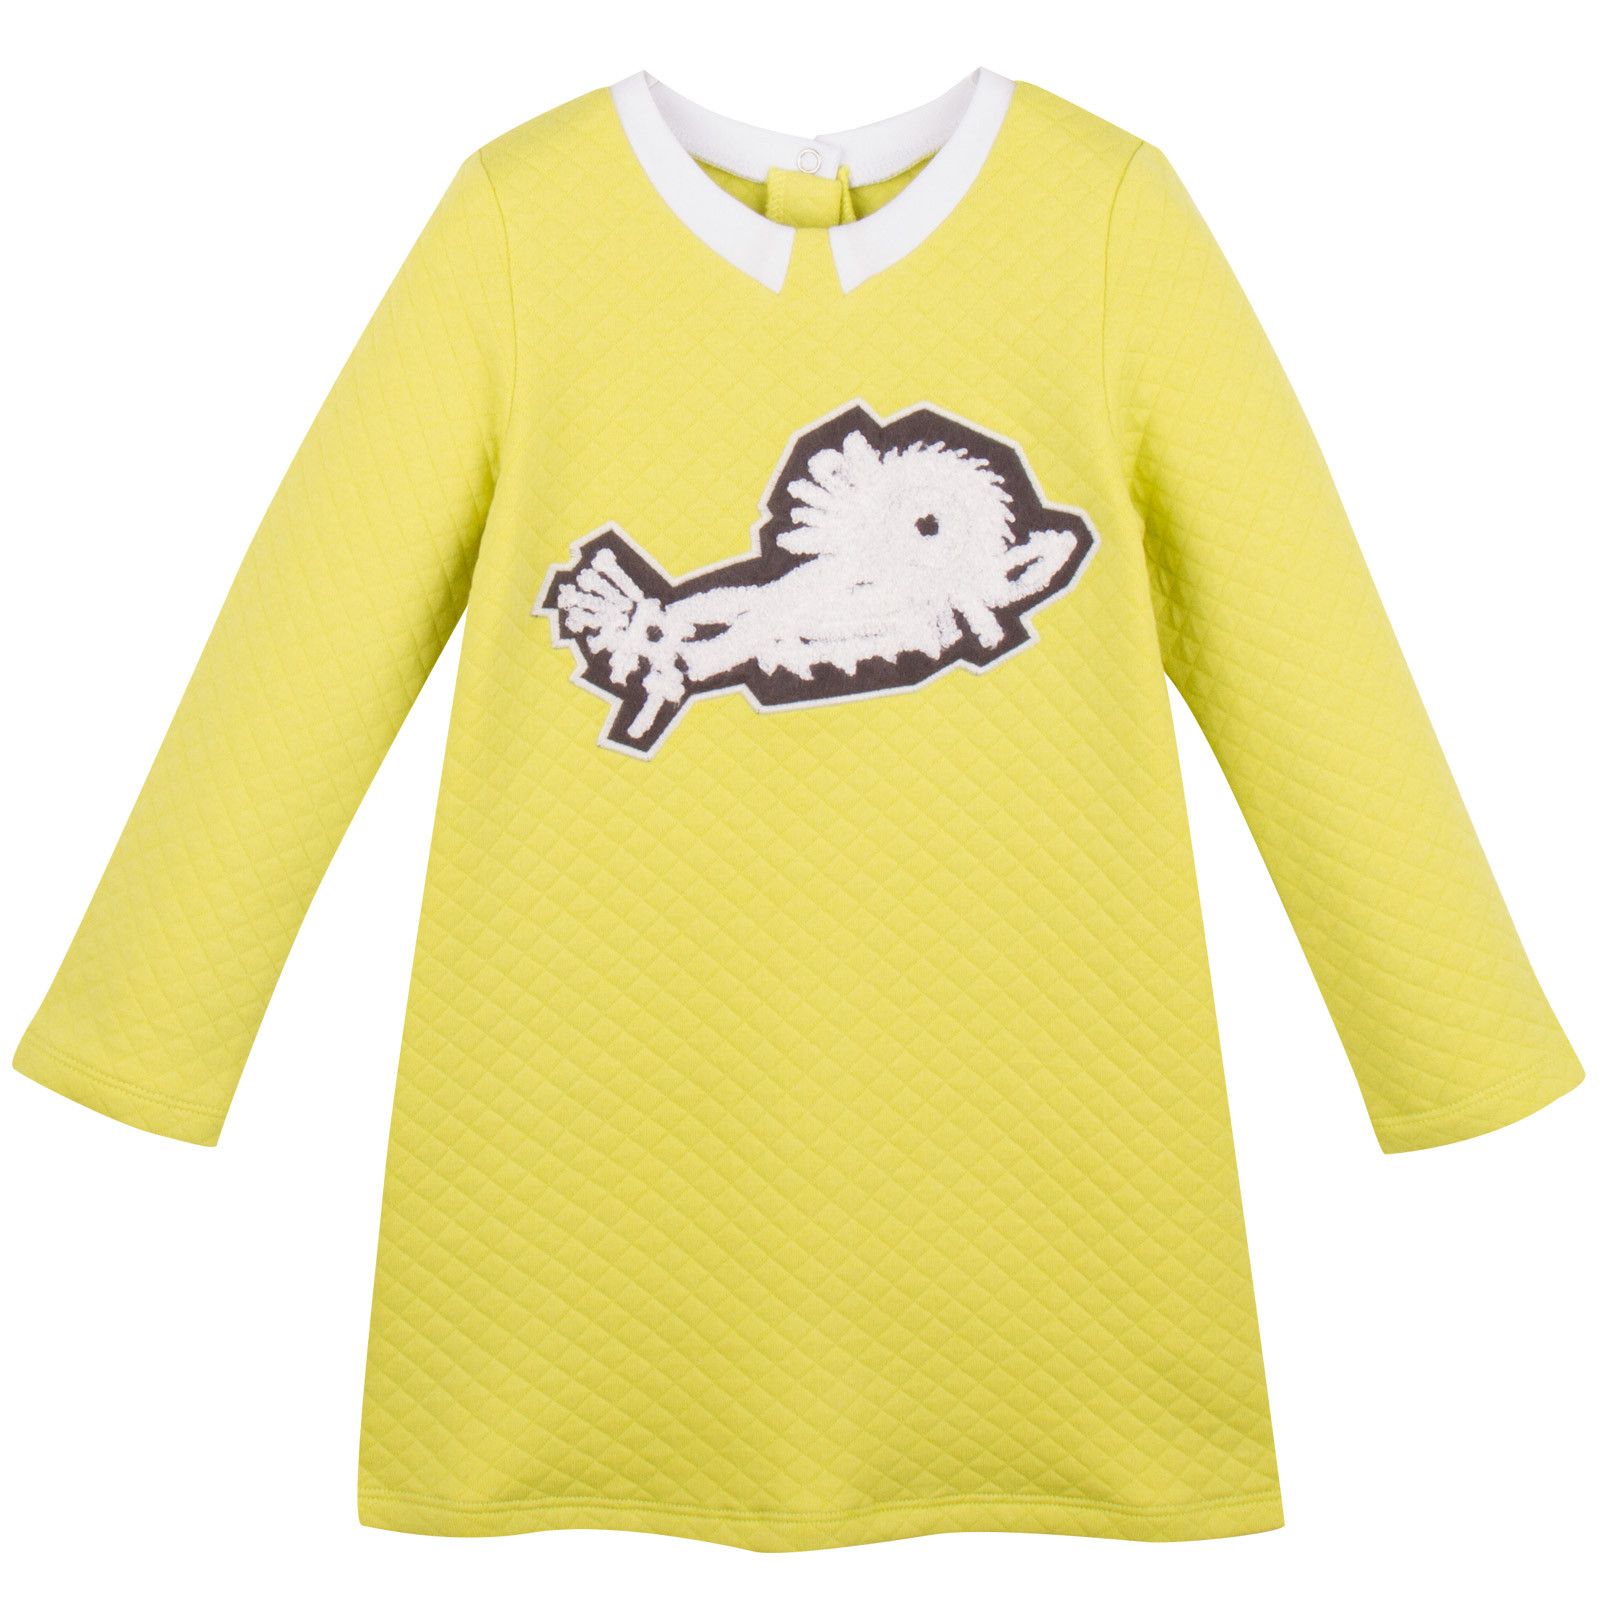 Baby Girls Lime Green Monster Embroidered Dress - CÉMAROSE | Children's Fashion Store - 1